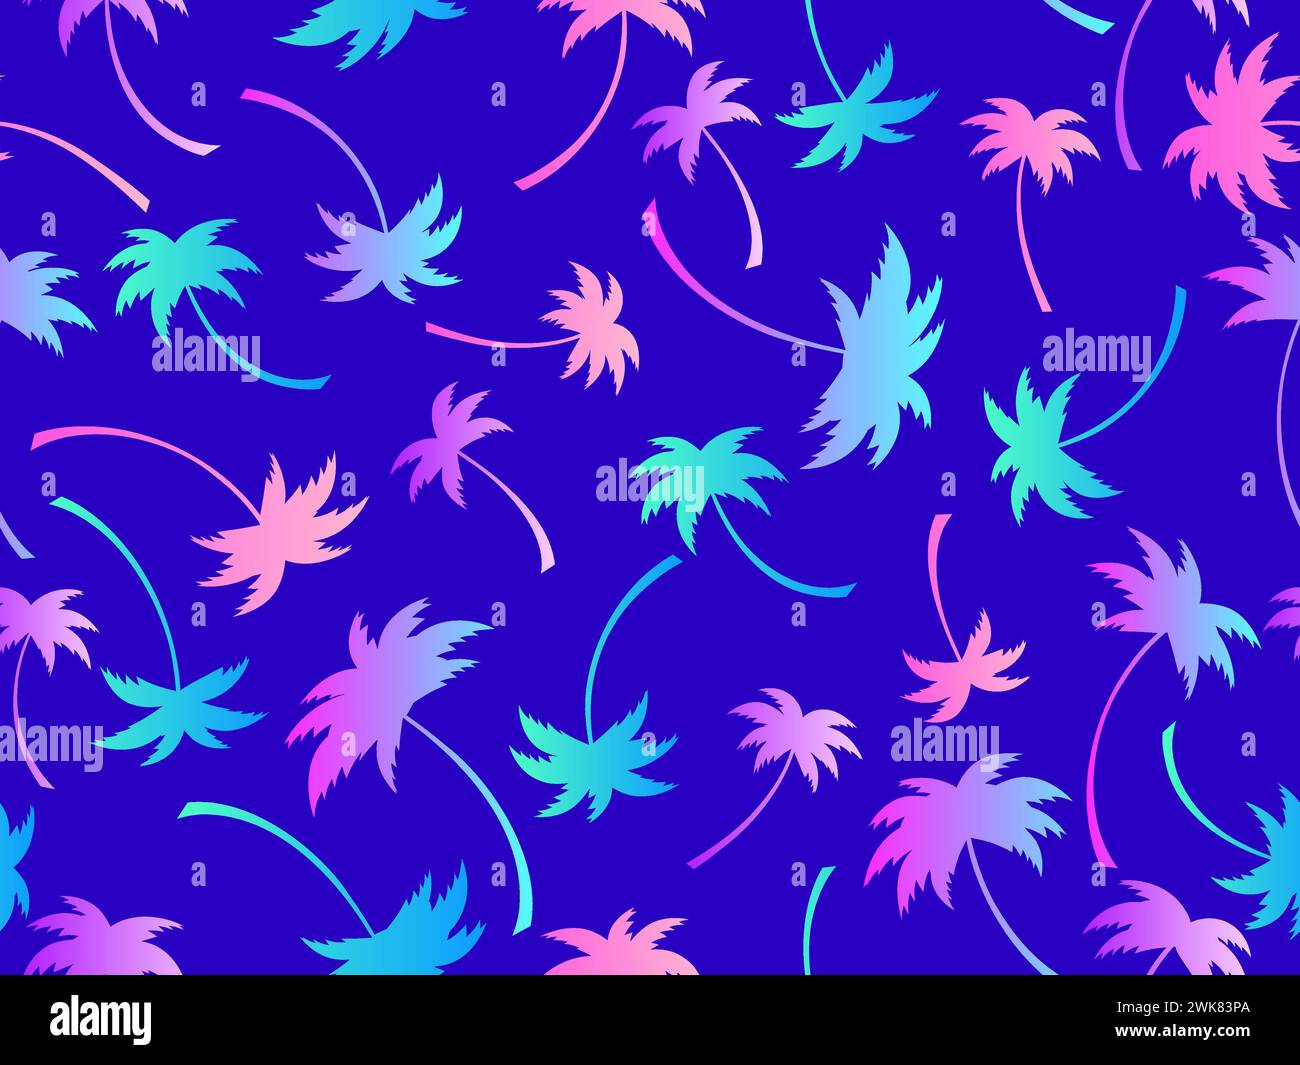 Palm trees silhouettes seamless pattern. Colorful gradient palm trees. Summer time, wallpaper with tropical pattern. Design for printing t-shirts, ban Stock Vector